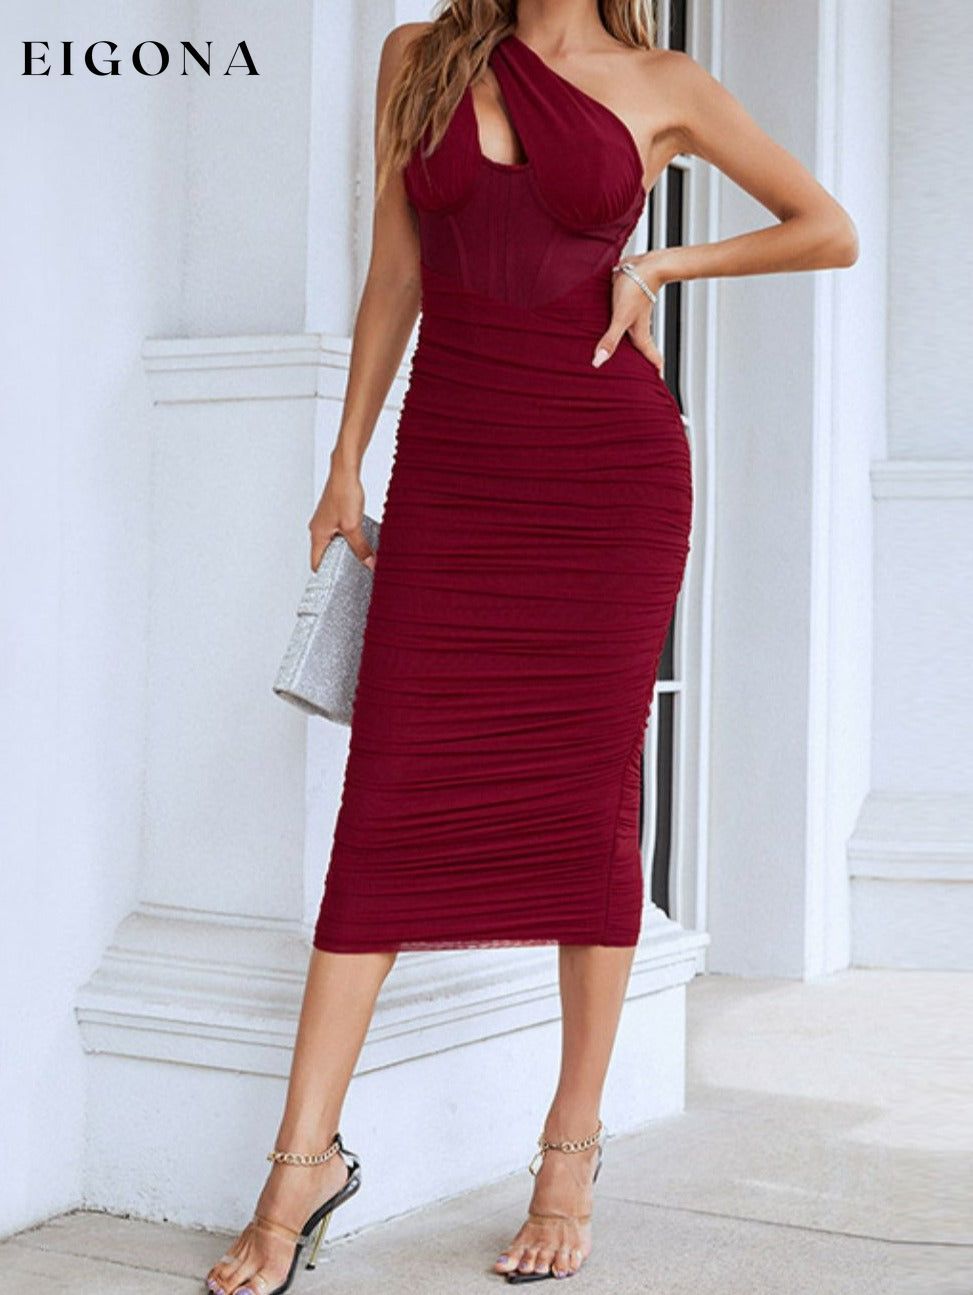 Cutout One-Shoulder Midi Bandage Dress clothes dress dresses evening dress evening dresses formal dress formal dresses midi dress midi dresses NF Ship From Overseas